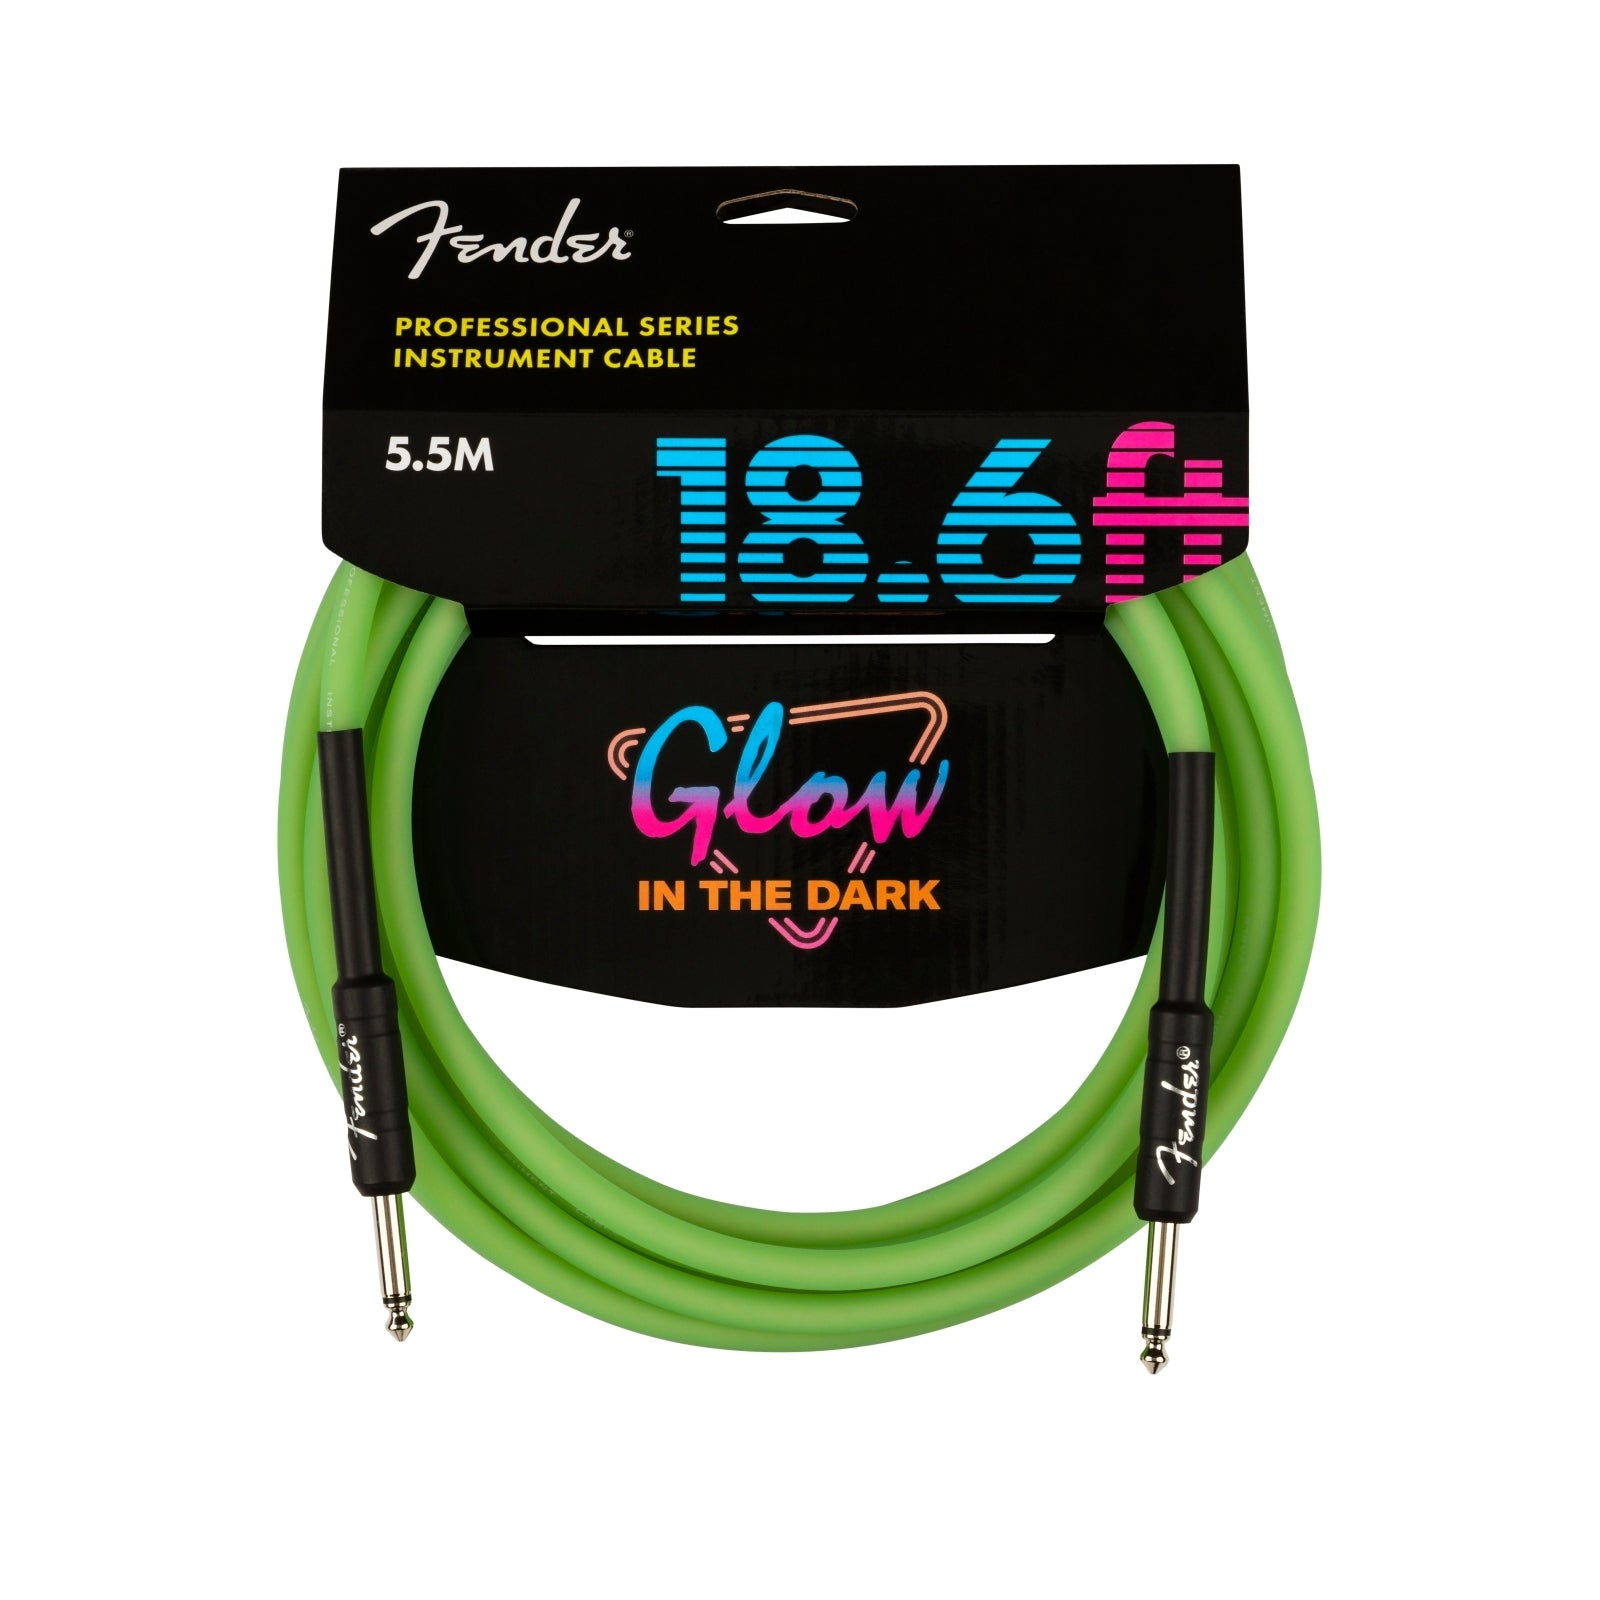 Fender Professional Series 18.6' Instrument Cable Glow In The Dark - Green